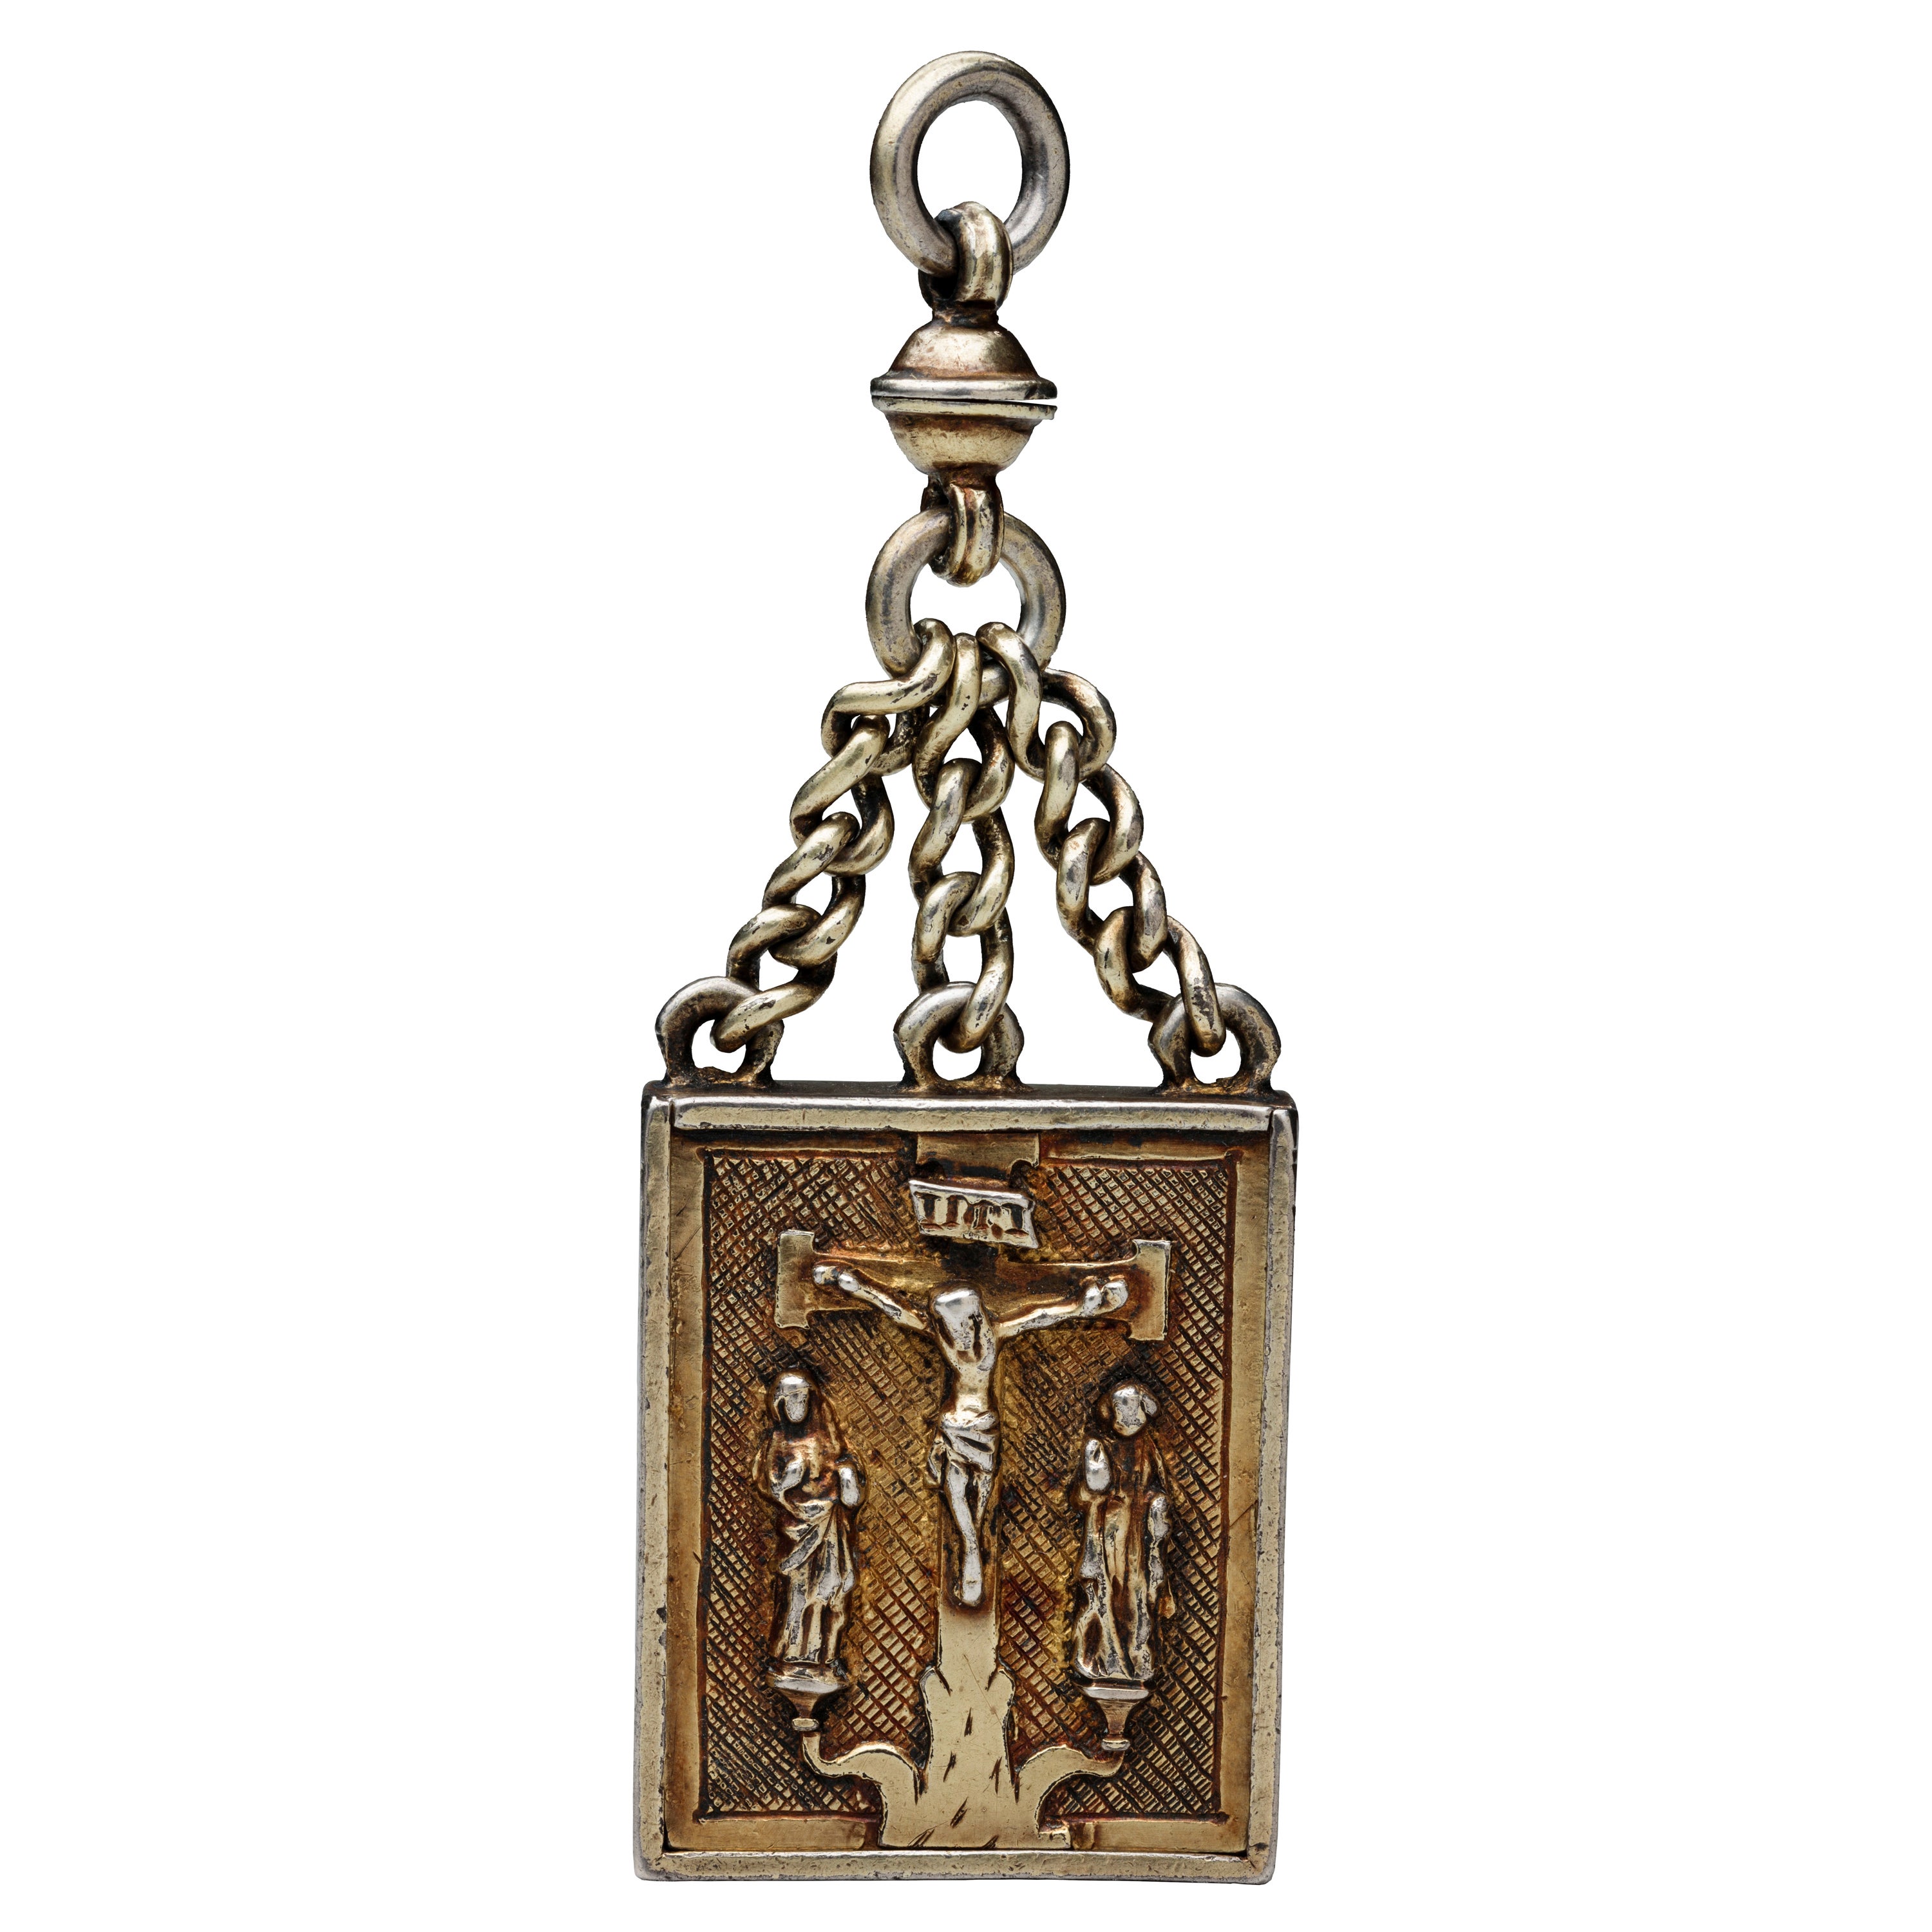 Early Renaissance Chained Reliquary Pendant with Crucifixion